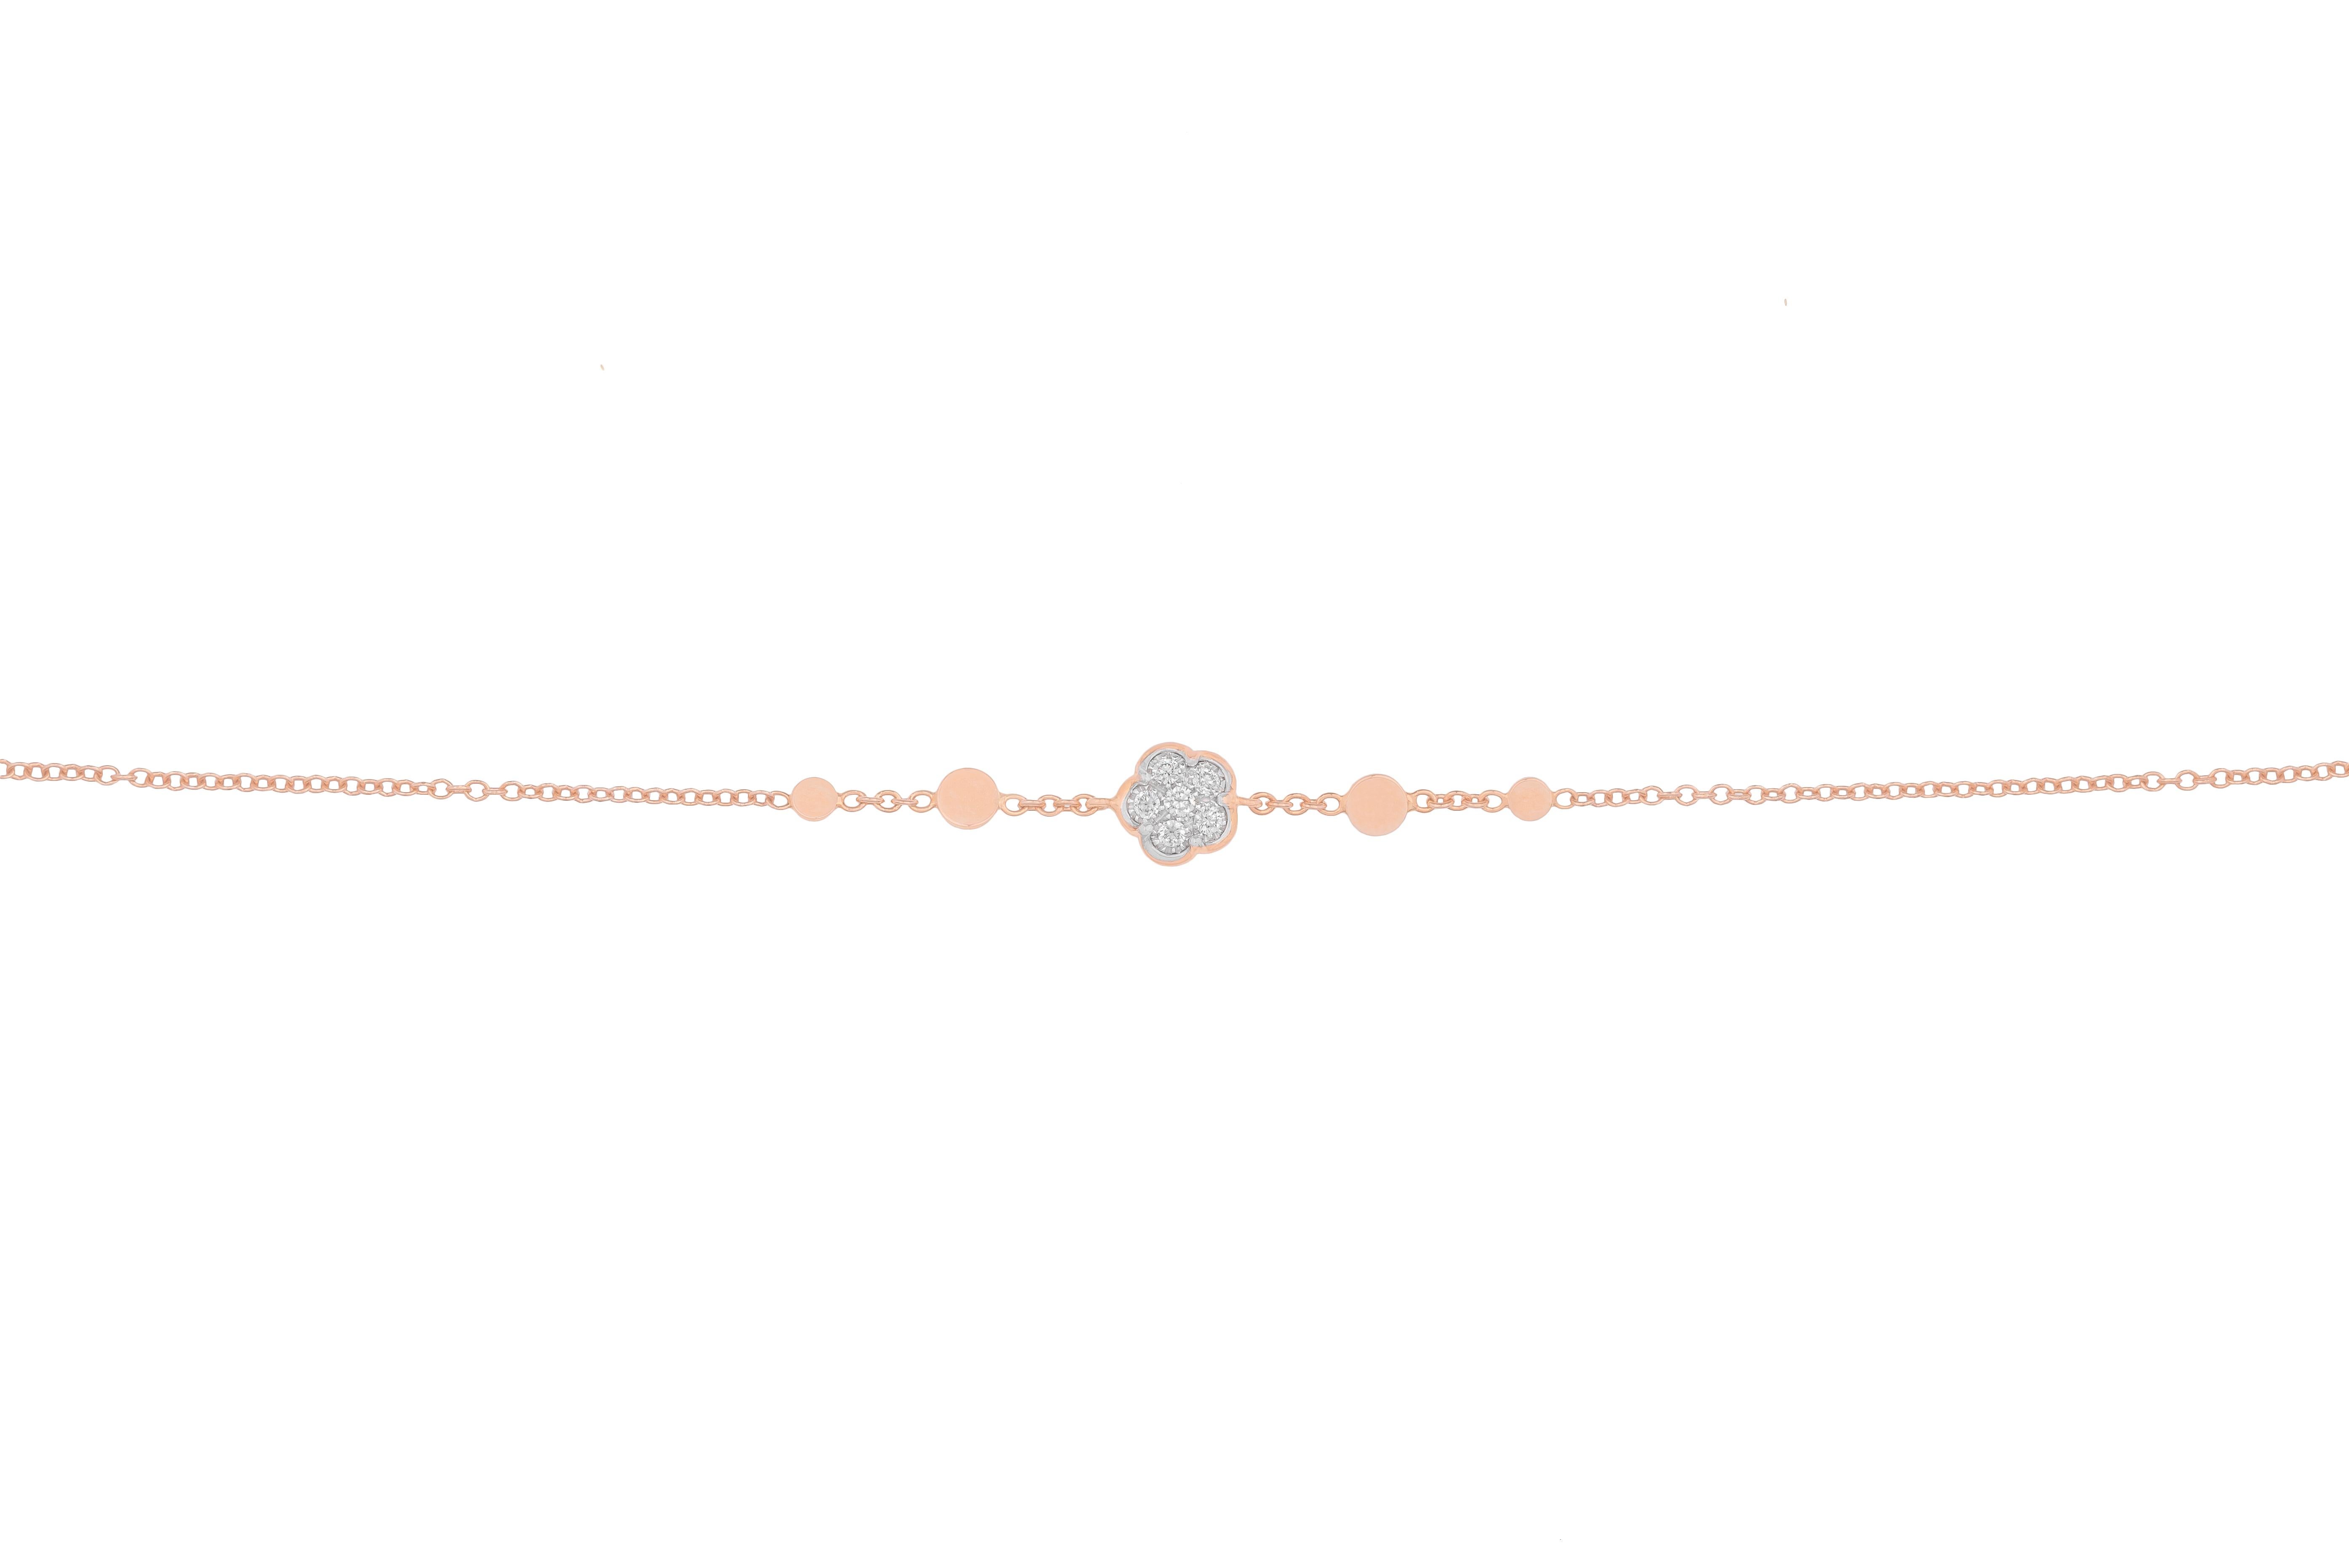 This 18K rose gold and white diamonds bracelet is made in Italy by Pasquale Bruni.
It features a small flower in the centre with 6 brilliant cut white diamonds. On both sides of the flower we find four rose gold flat balls.
Two heart shaped rings at